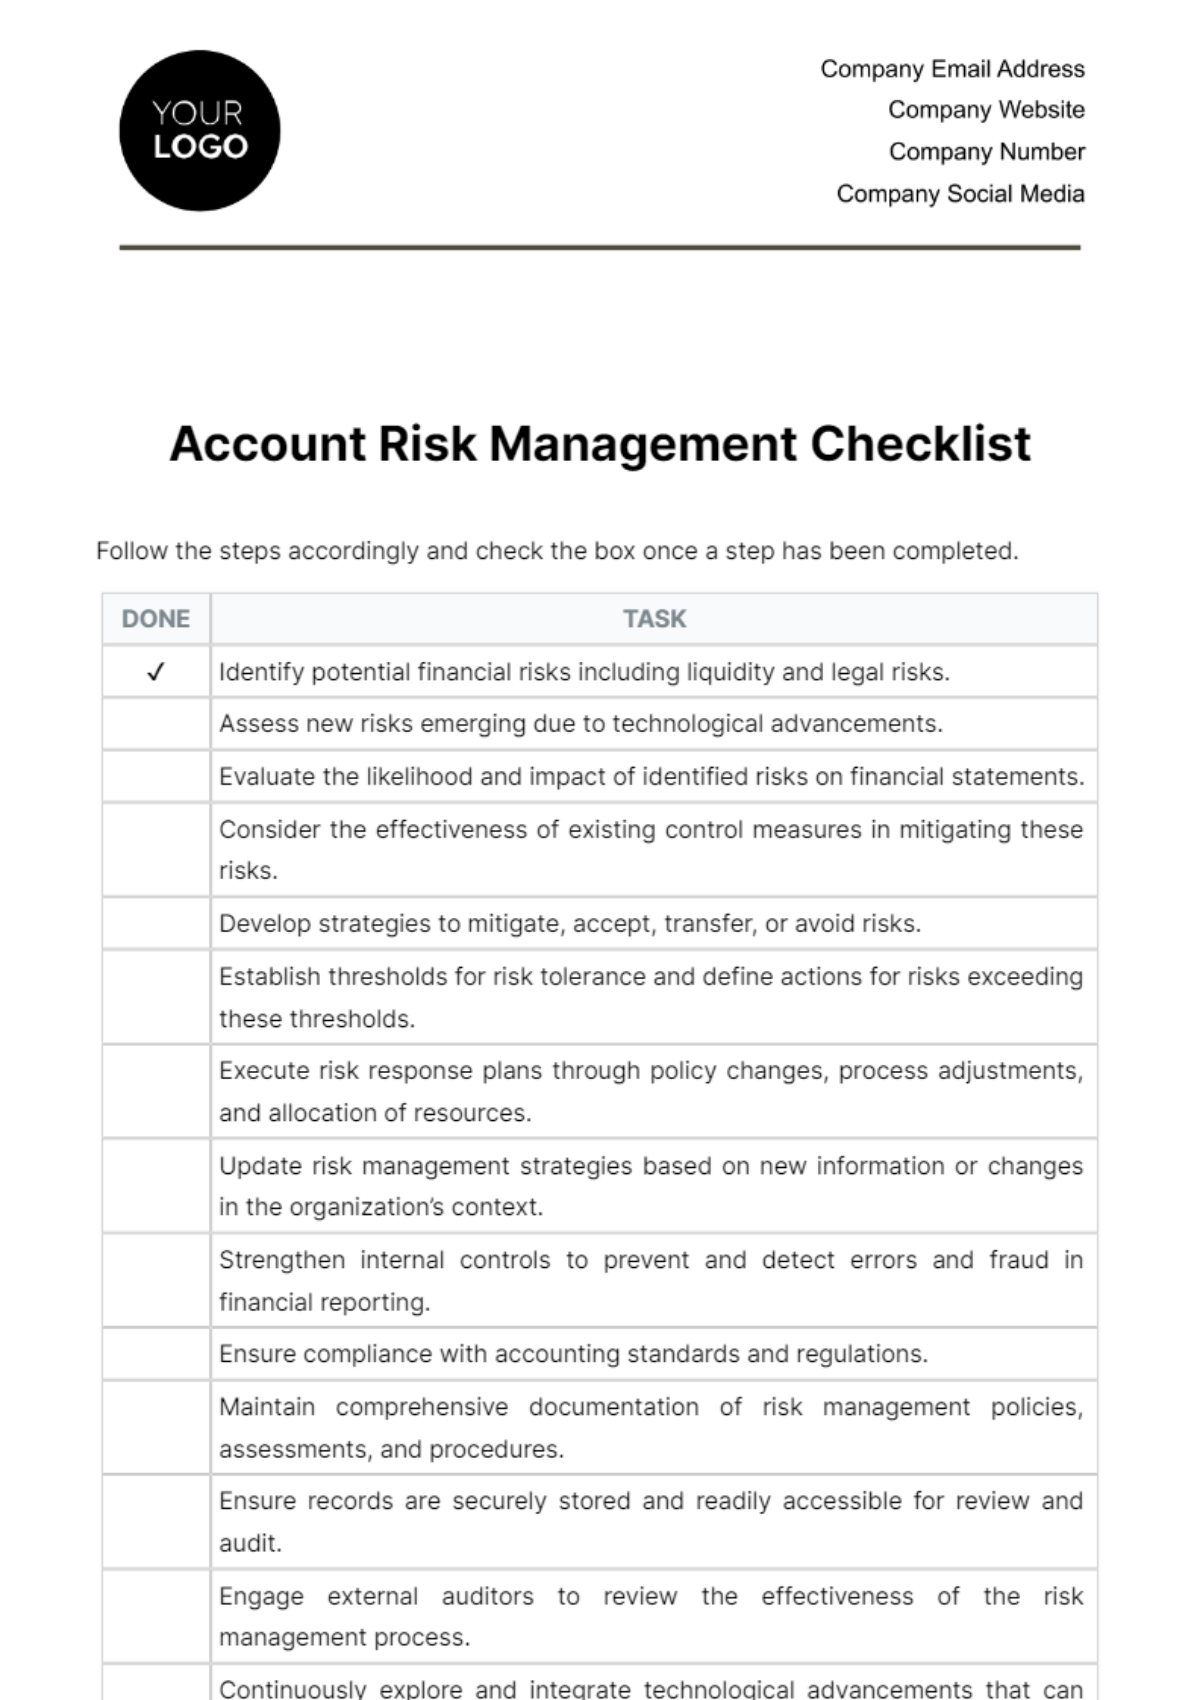 Free Account Risk Management Checklist Template